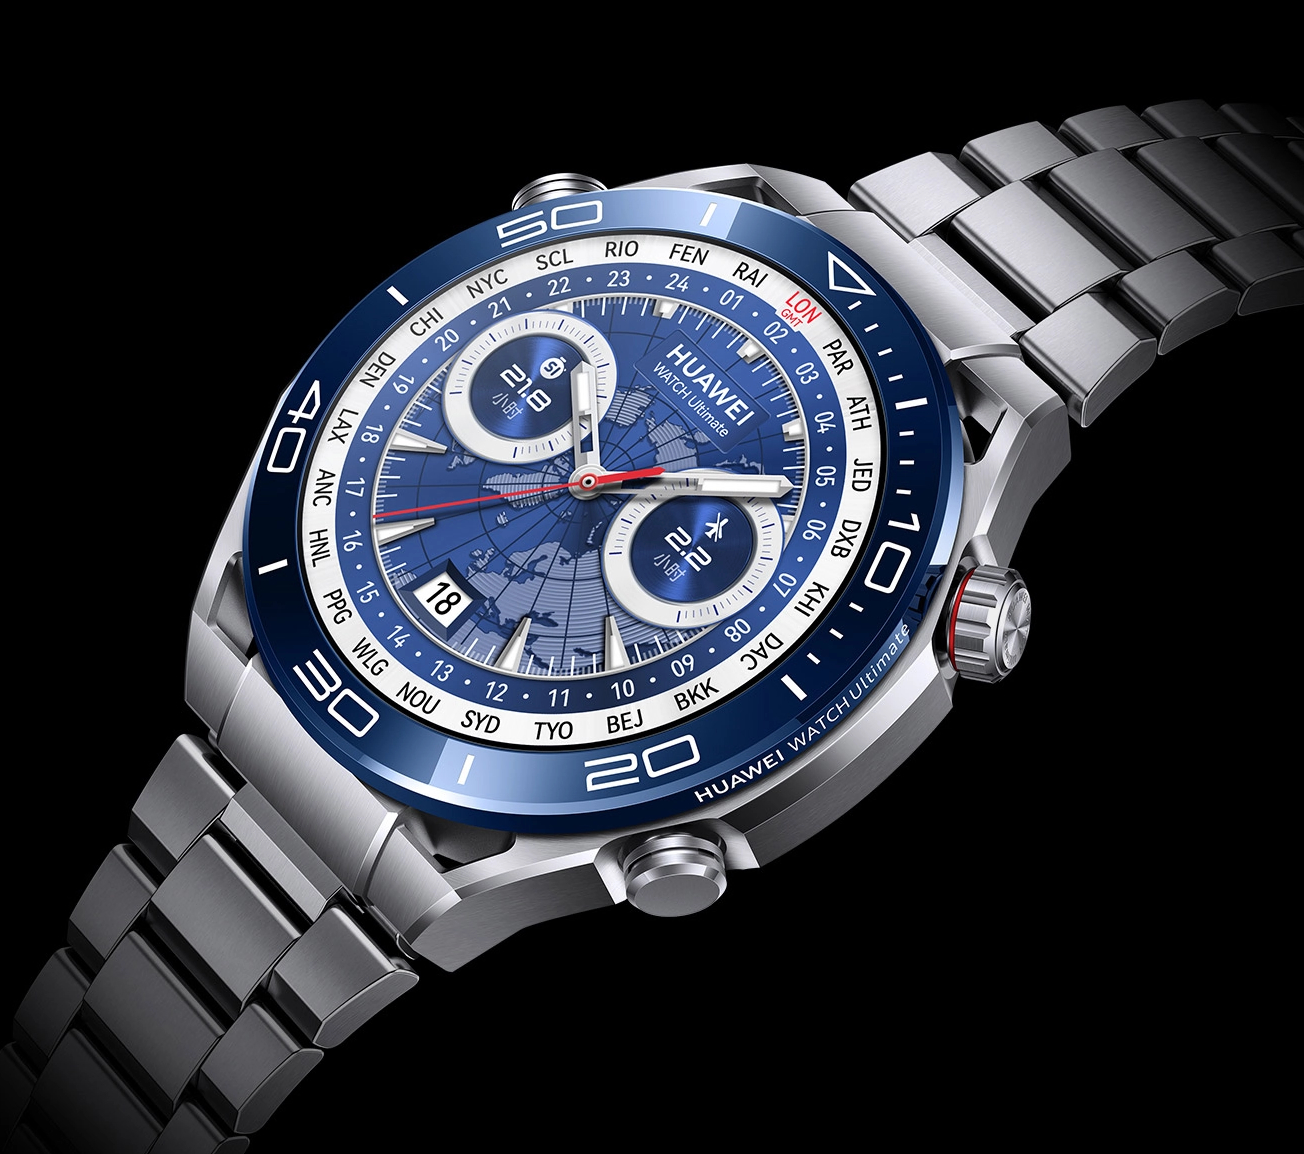 Huawei Watch Ultimate: New smartwatch showcased with innovative